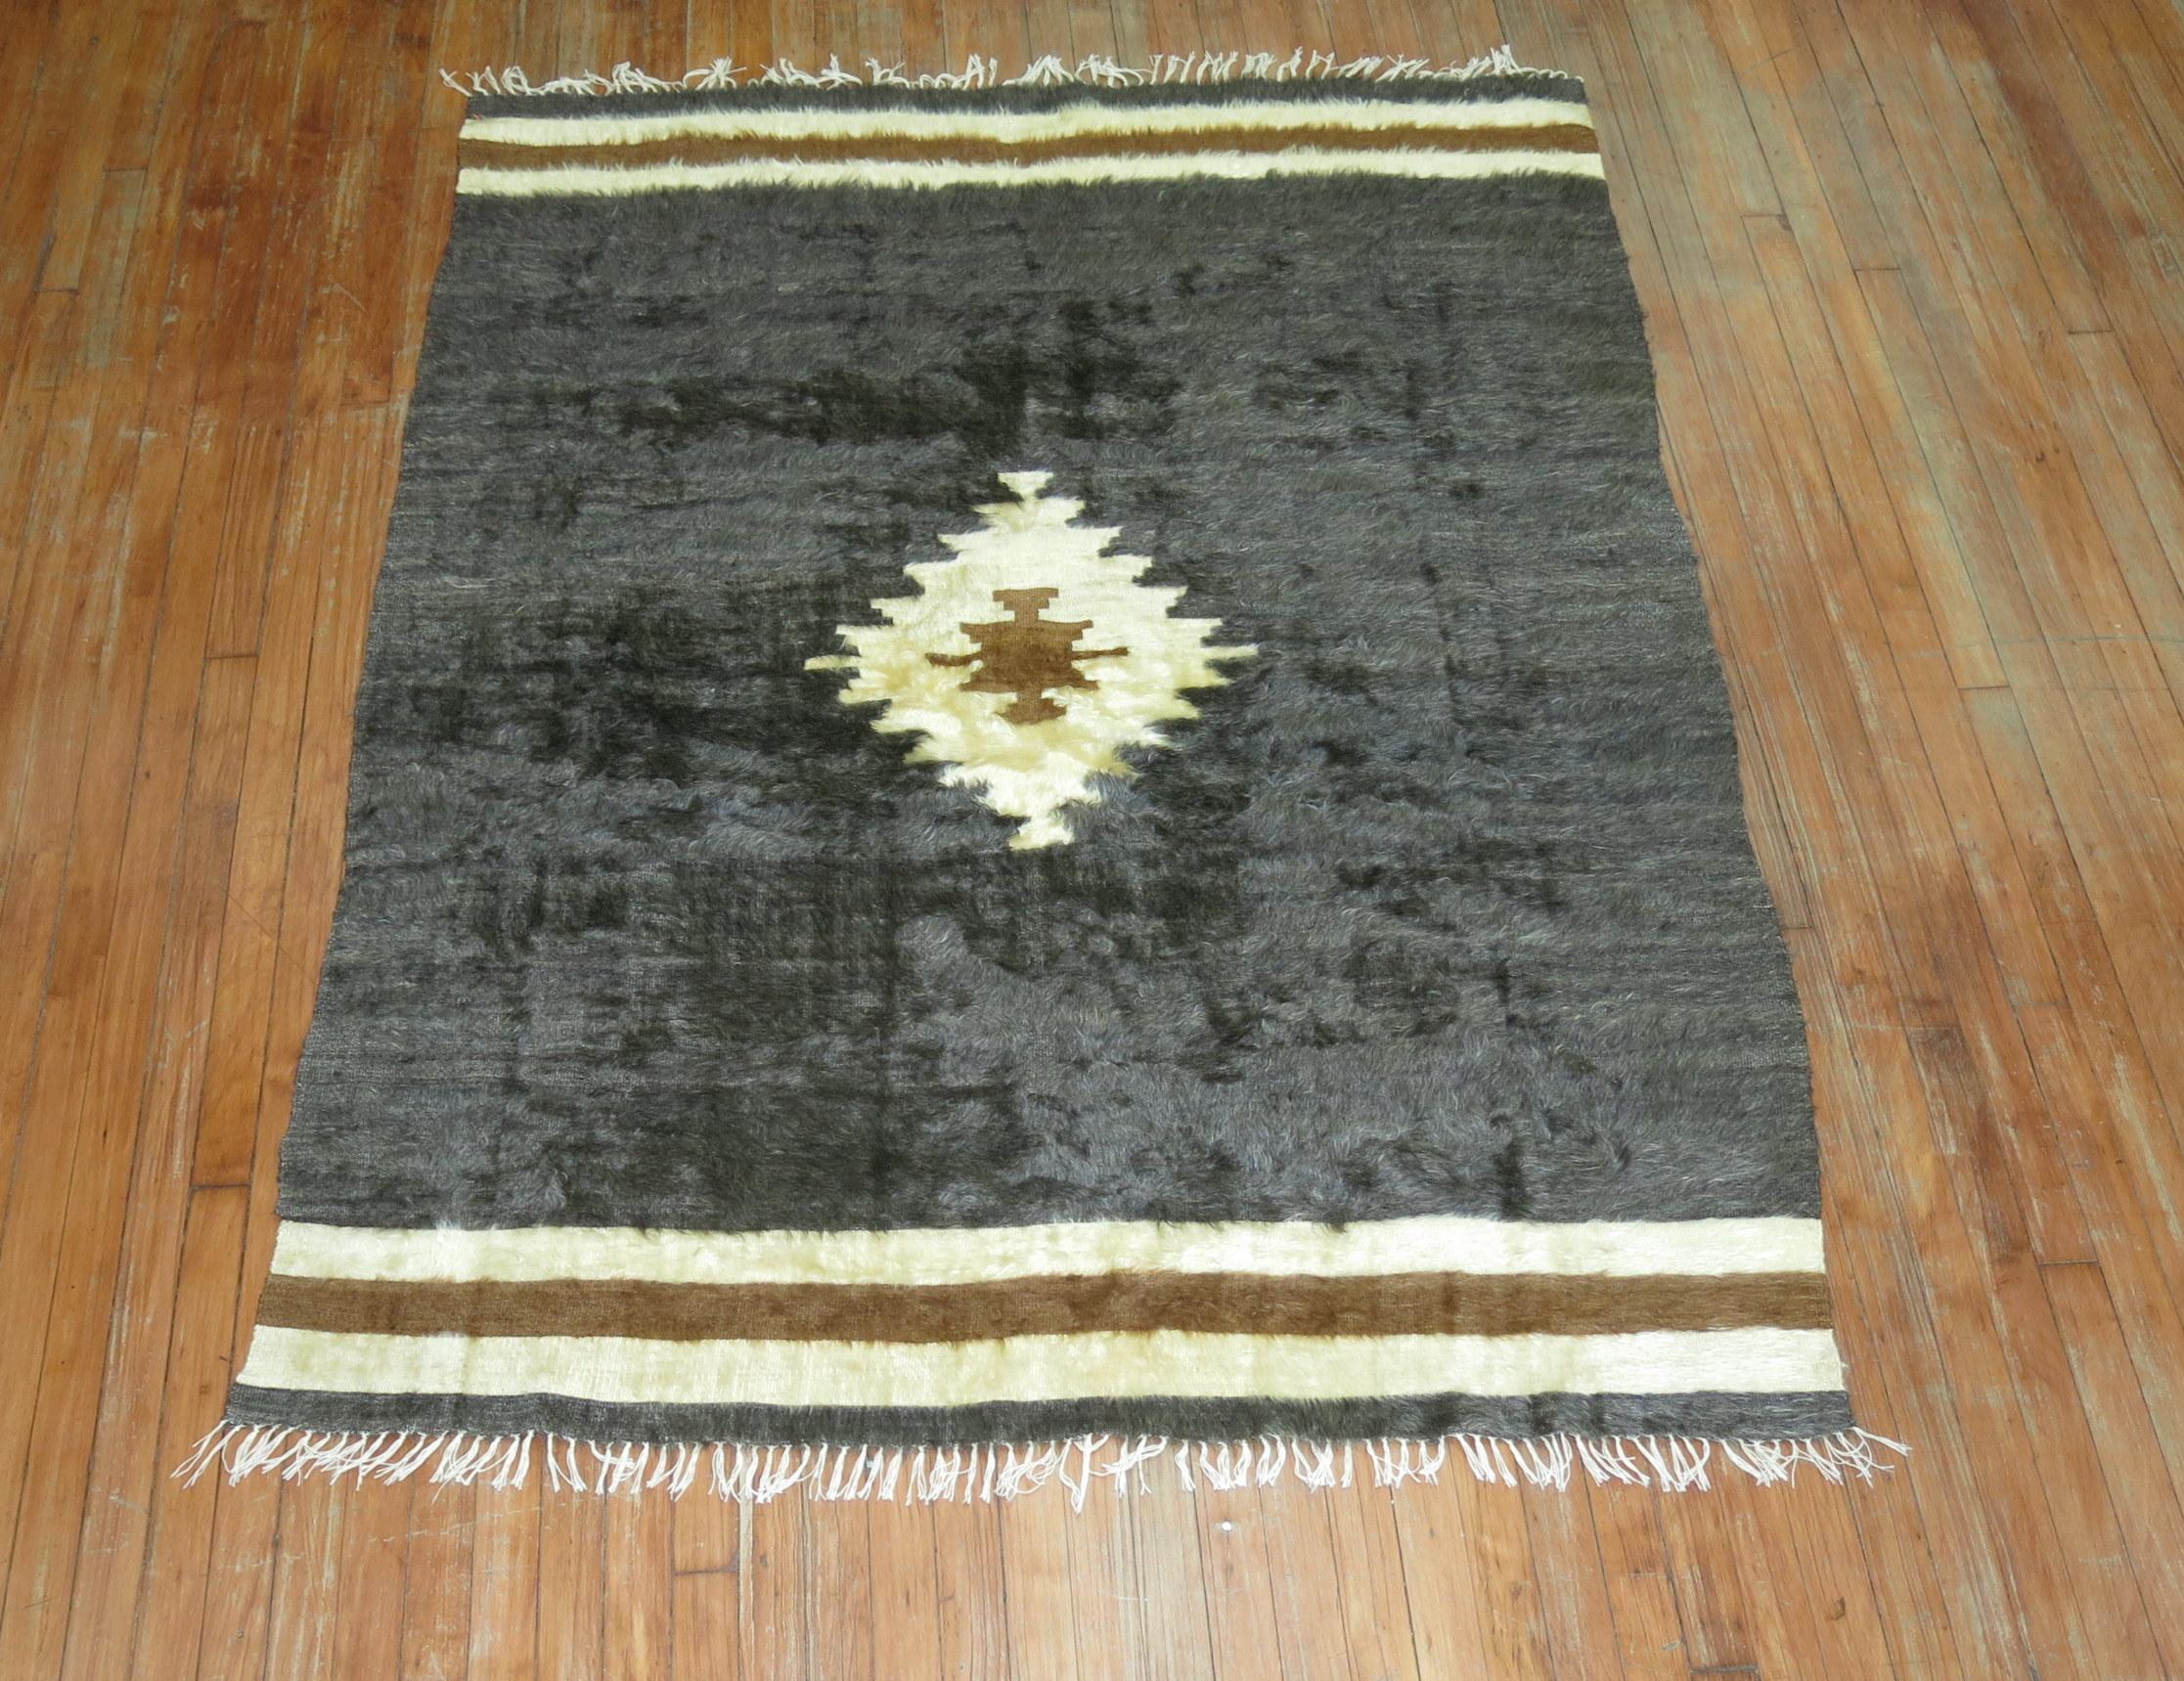 A mid-20th century one of a kind Turkish sirt rug woven with Mohair wool. These pieces are inspired by traditional tribal weaving's but they are used mostly for decorative purposes and have a strong modernist appeal. The unique pile technique adds a